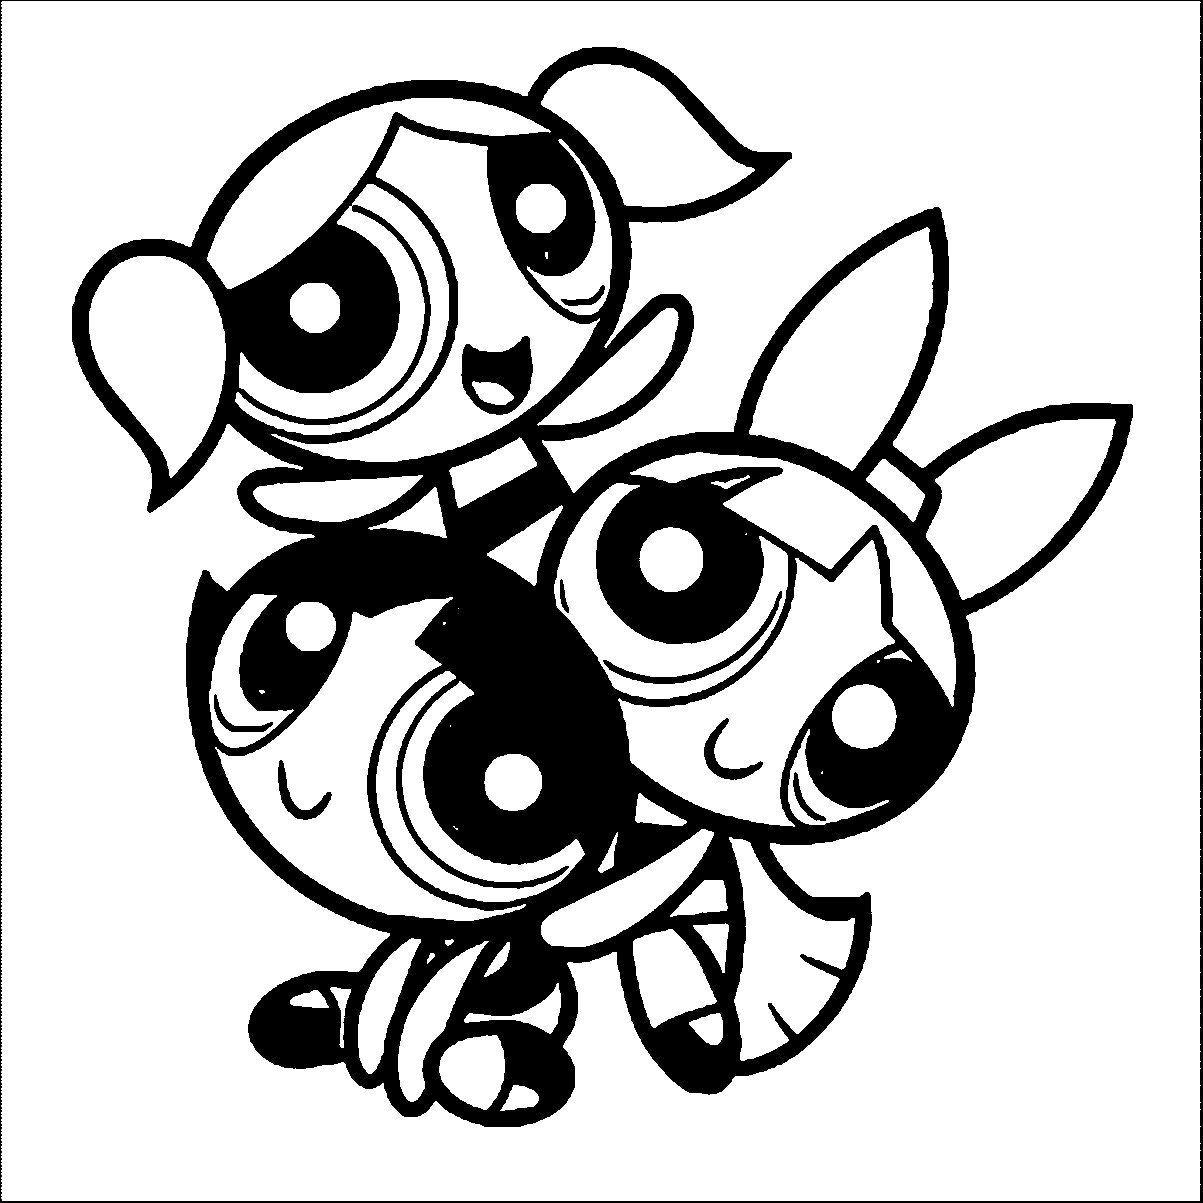 Coloring Pages For Girls The Power Puff Power
 Powerpuff Girls Coloring Pages